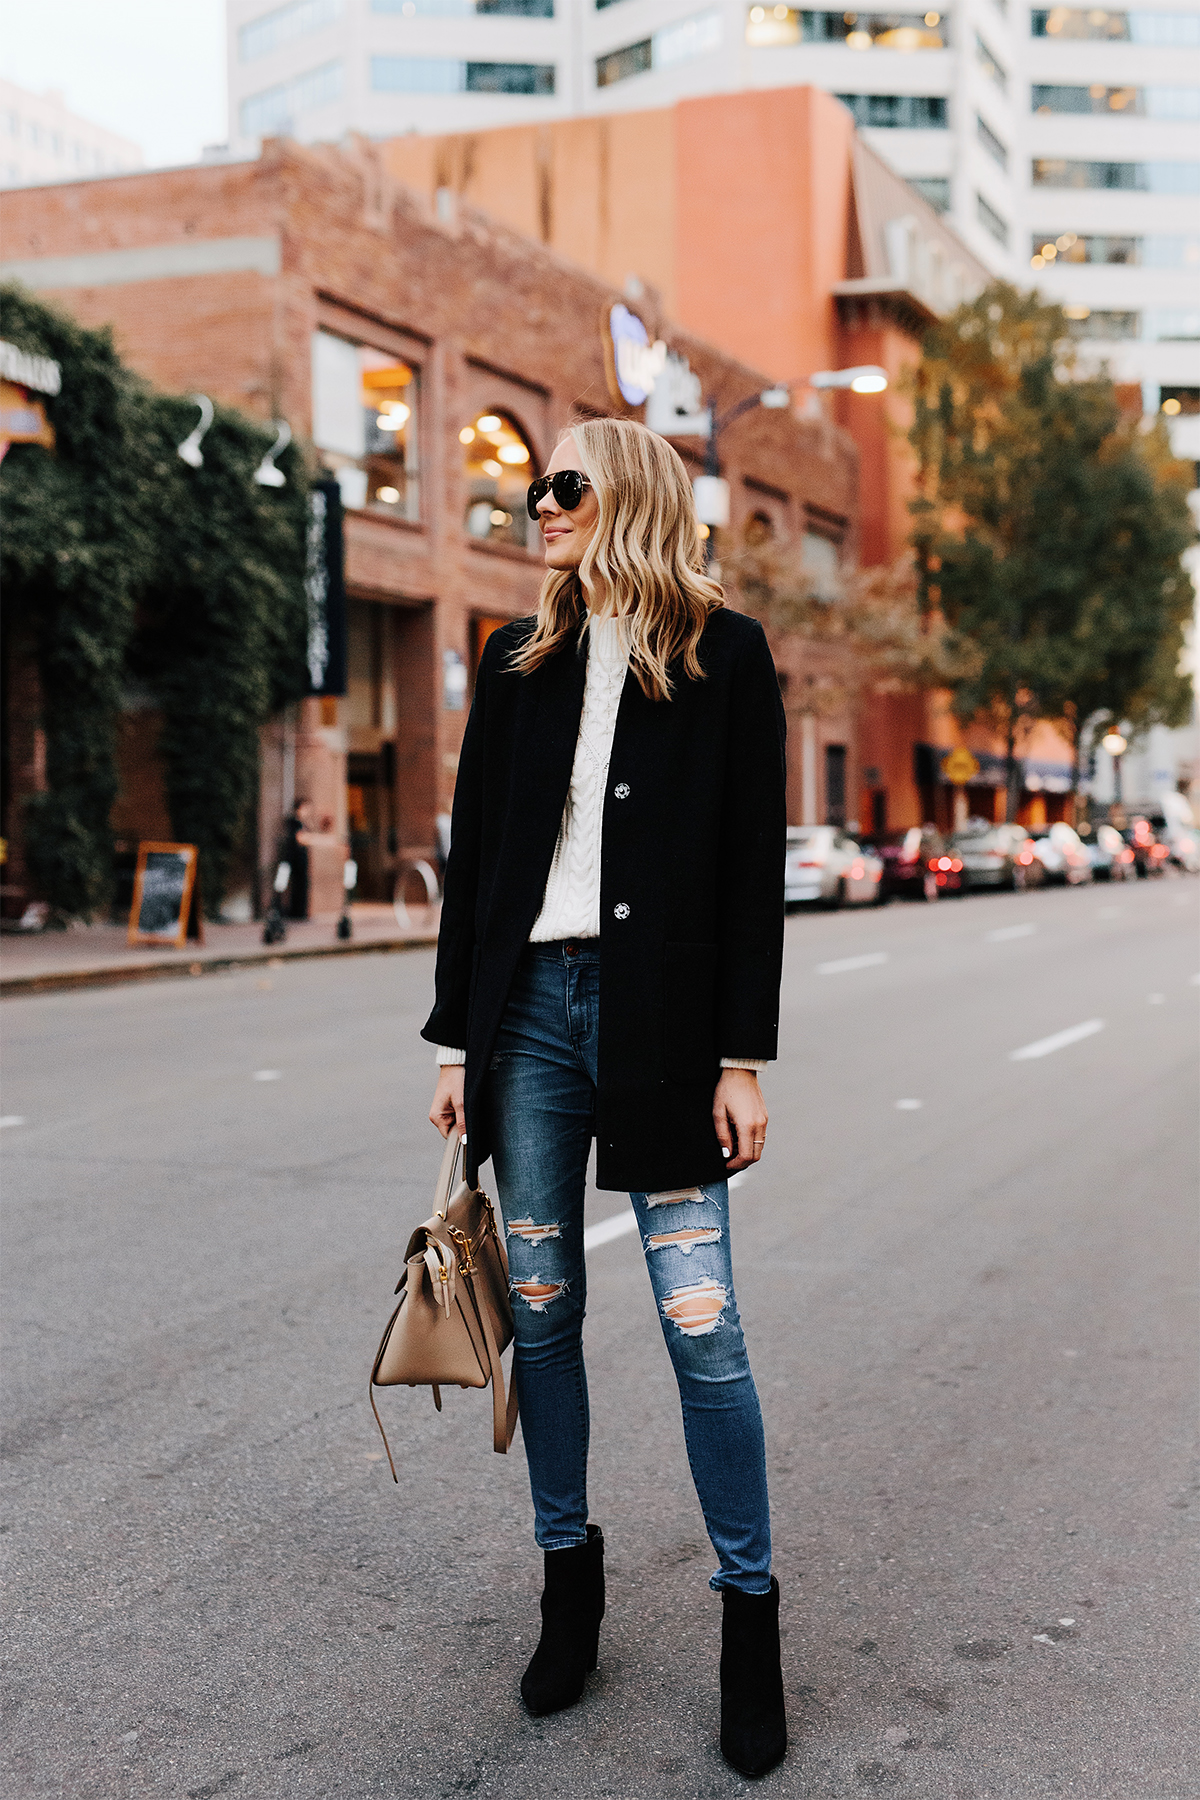 Blonde Woman Wearing Abercrombie Black Wool Coat Cable Knit White Sweater Denim Ripped Skinny Jeans Black Booties Outfit Fashion Jackson San Diego Fashion Blogger Street Style